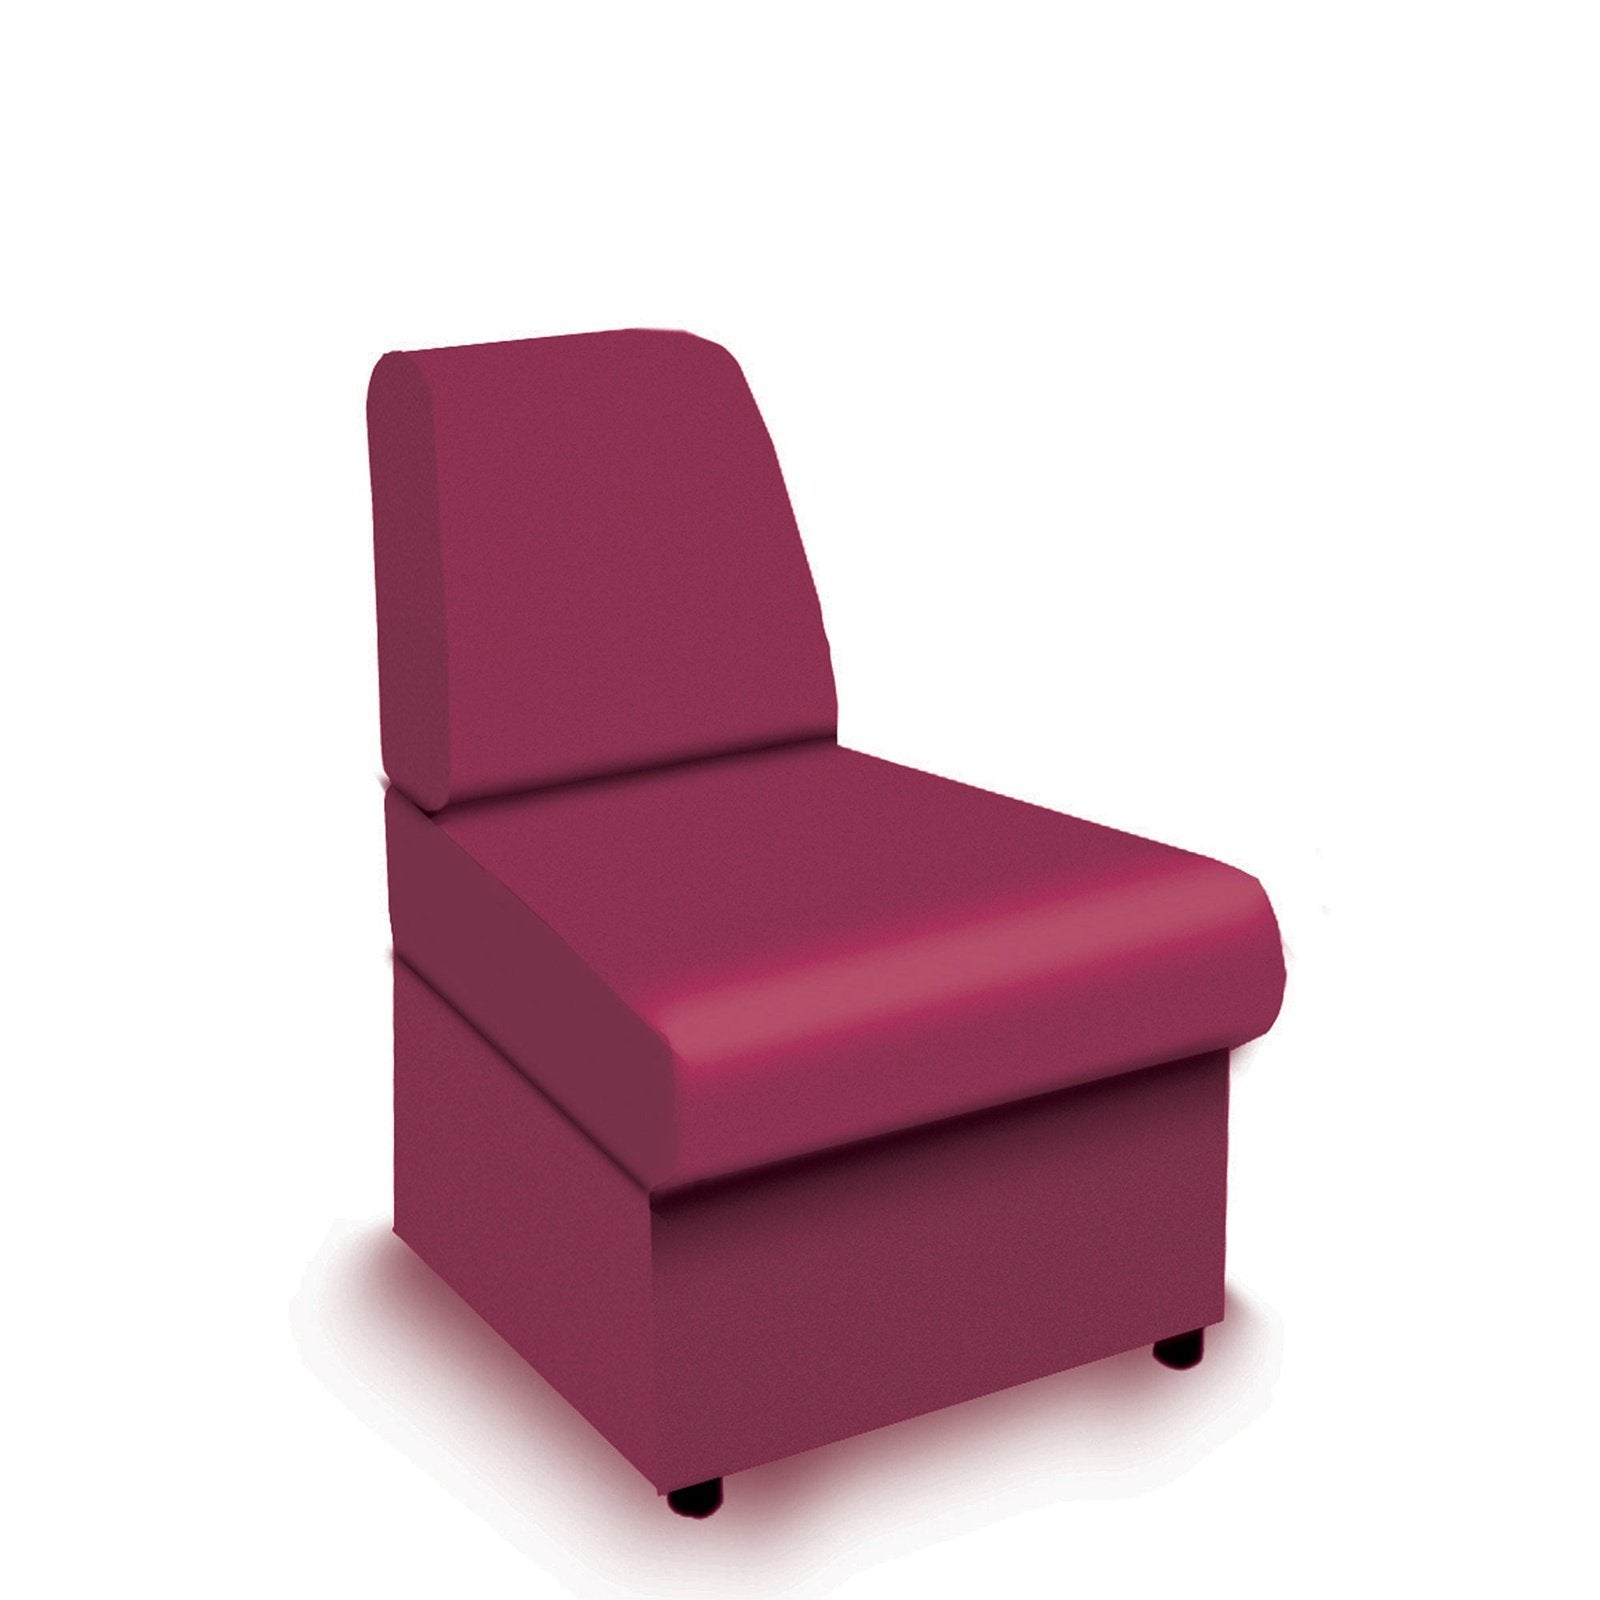 Contemporary Modular Fabric Low Back Sofa - Convex - Office Products Online